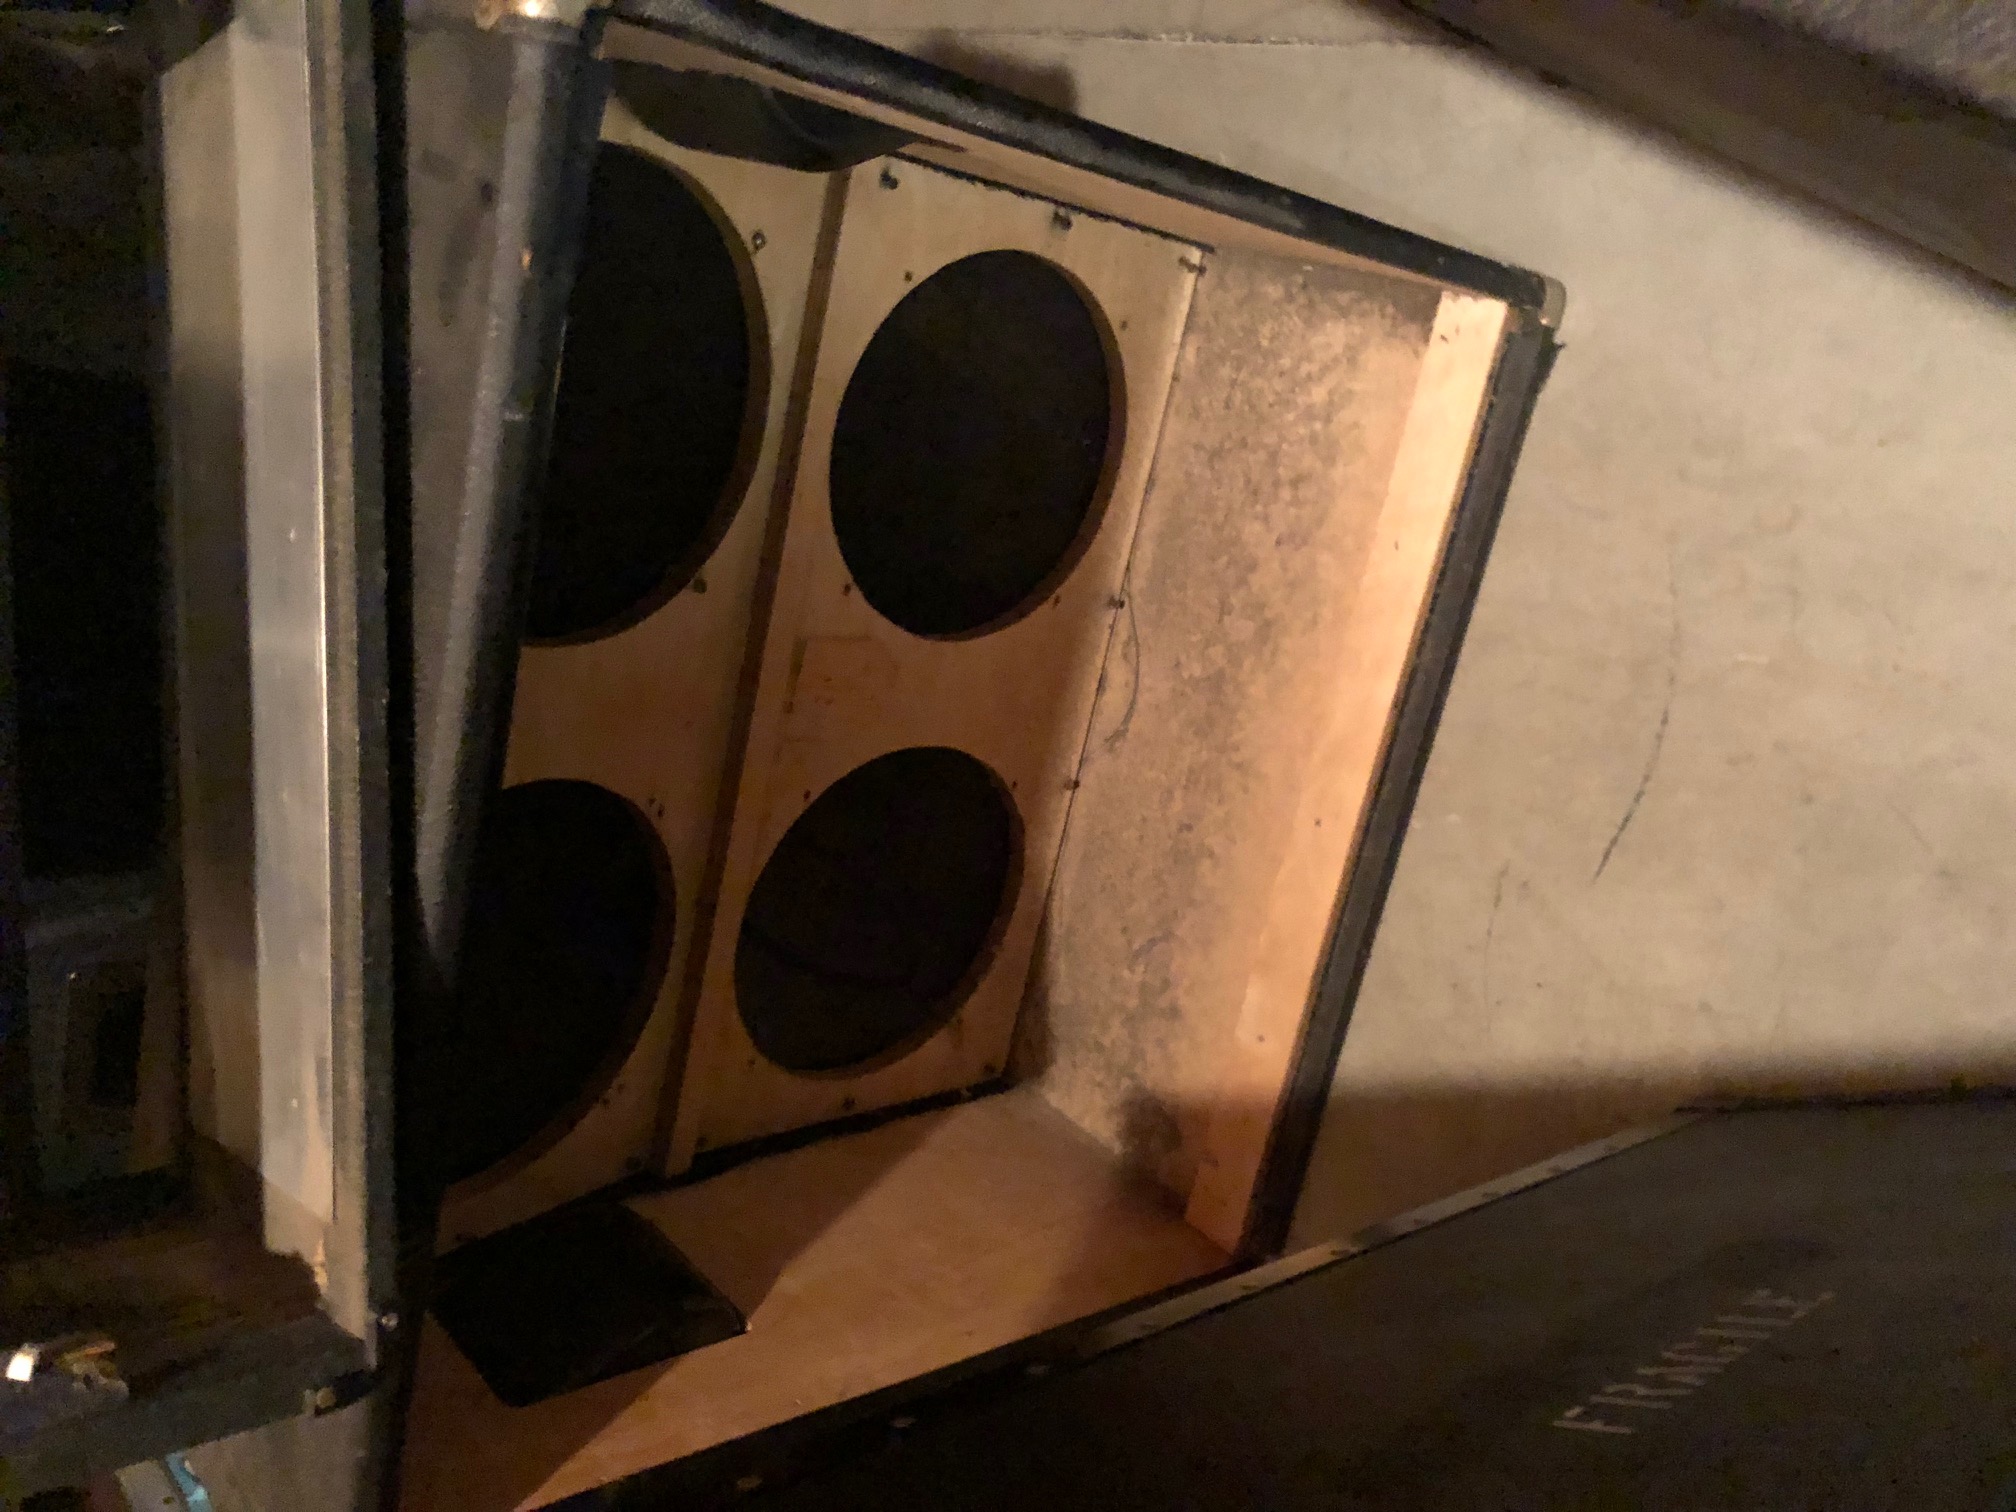 "Dummy" Amps turned against wall to appear real